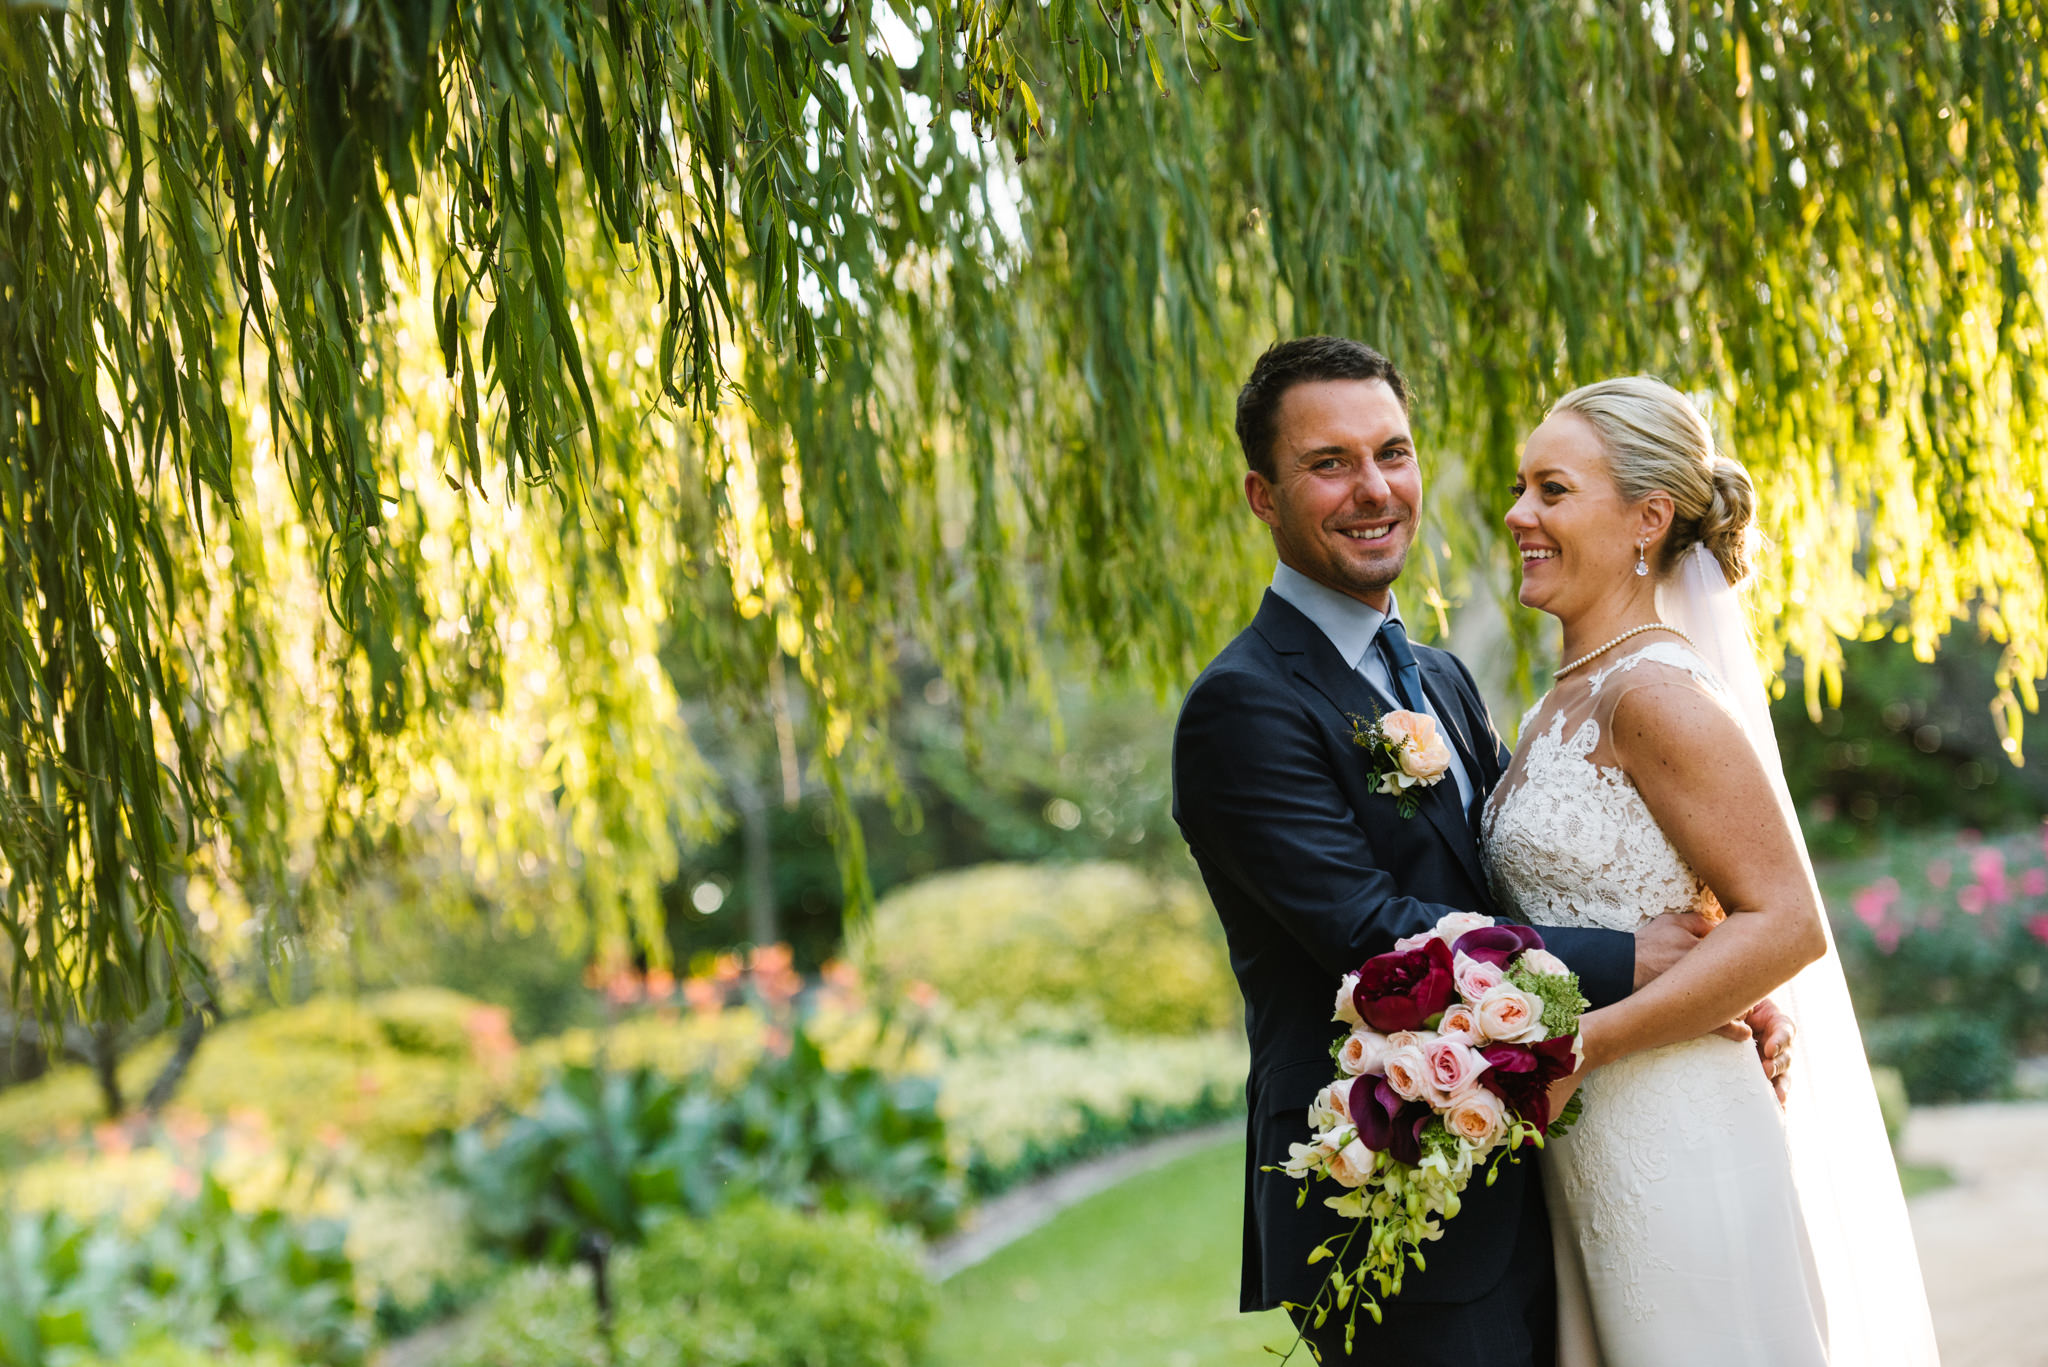 Bride and groom in gardens